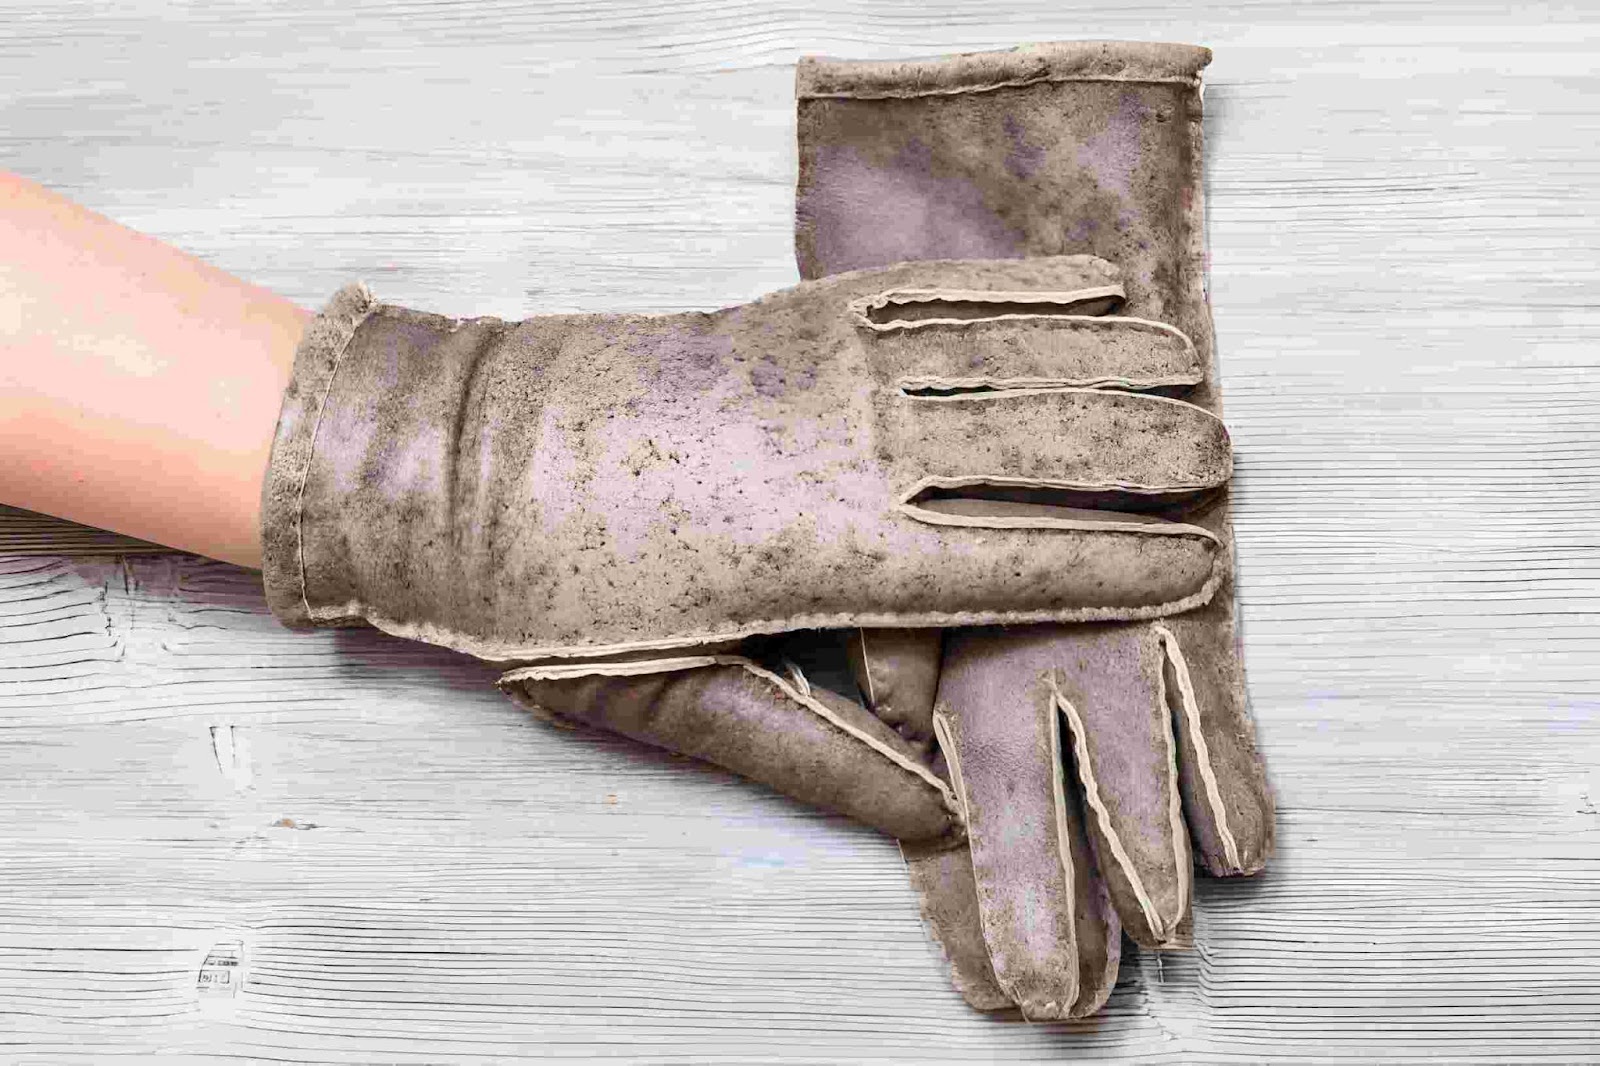 Insulated Leather Gloves